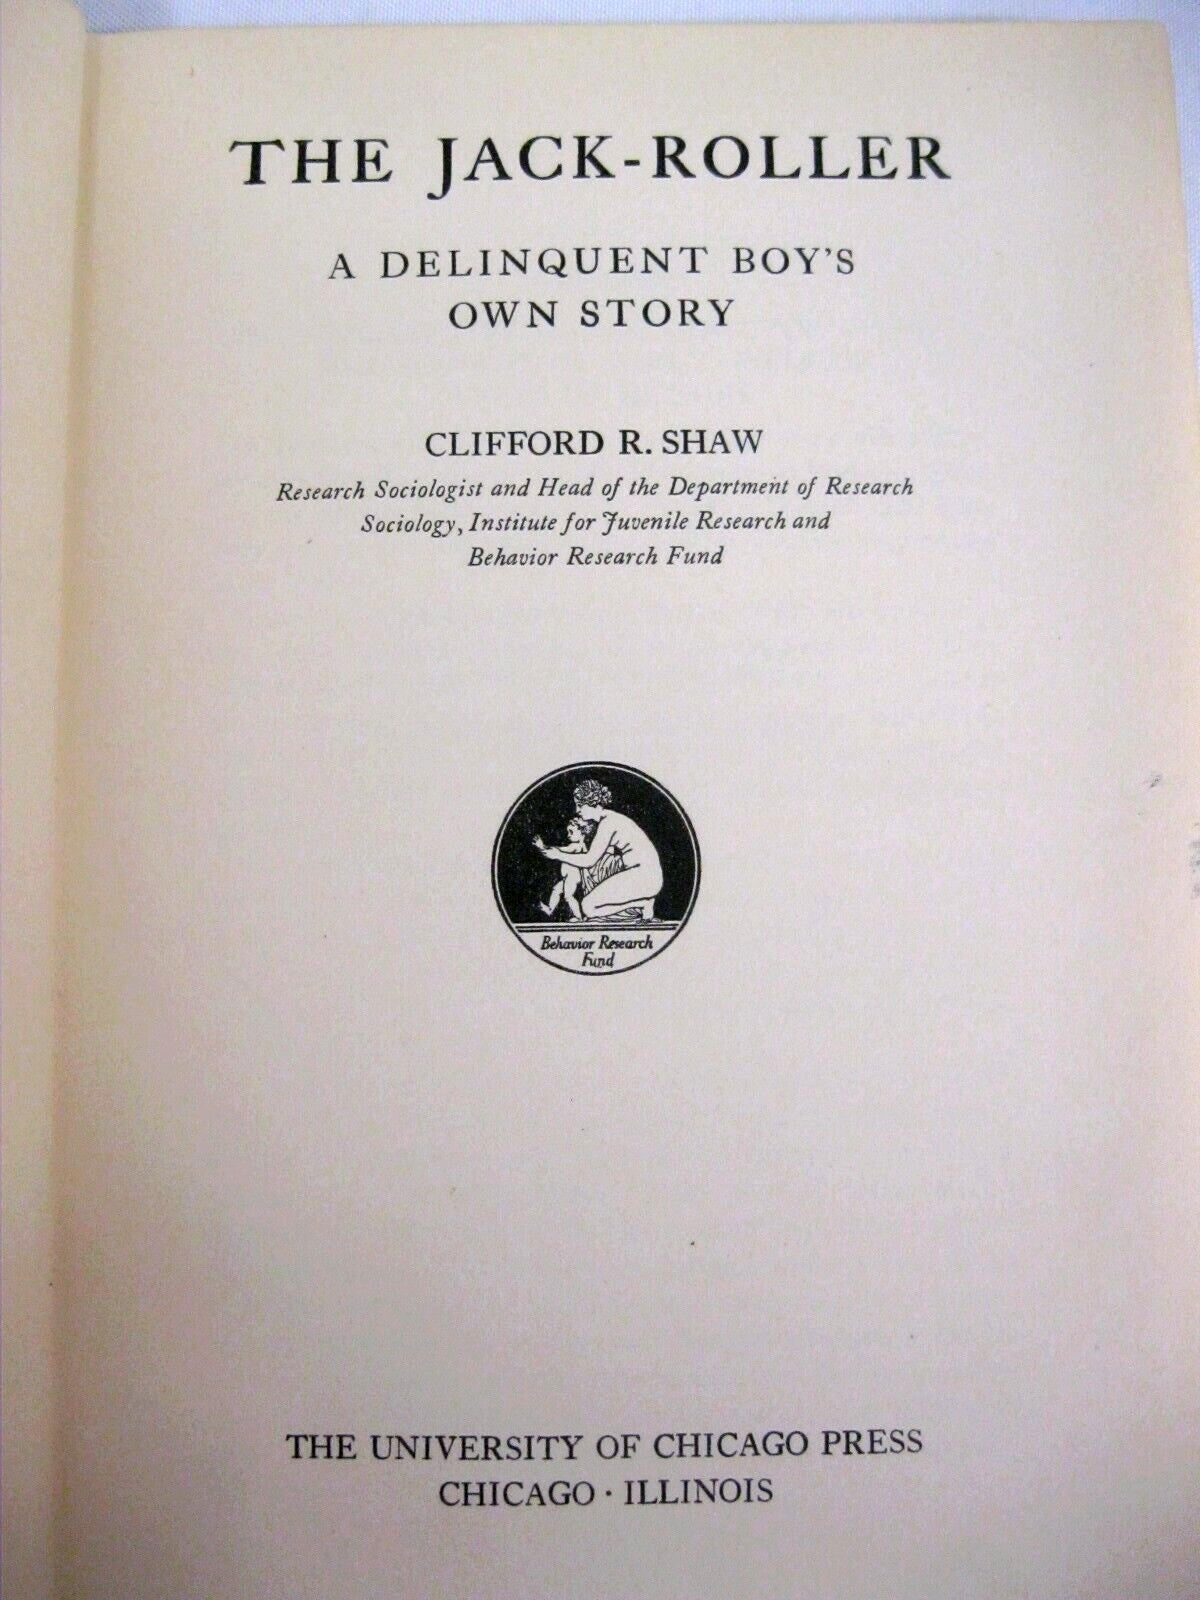 The Jack-Roller: A Delinquent Boy's Own Story by Clifford R Shaw